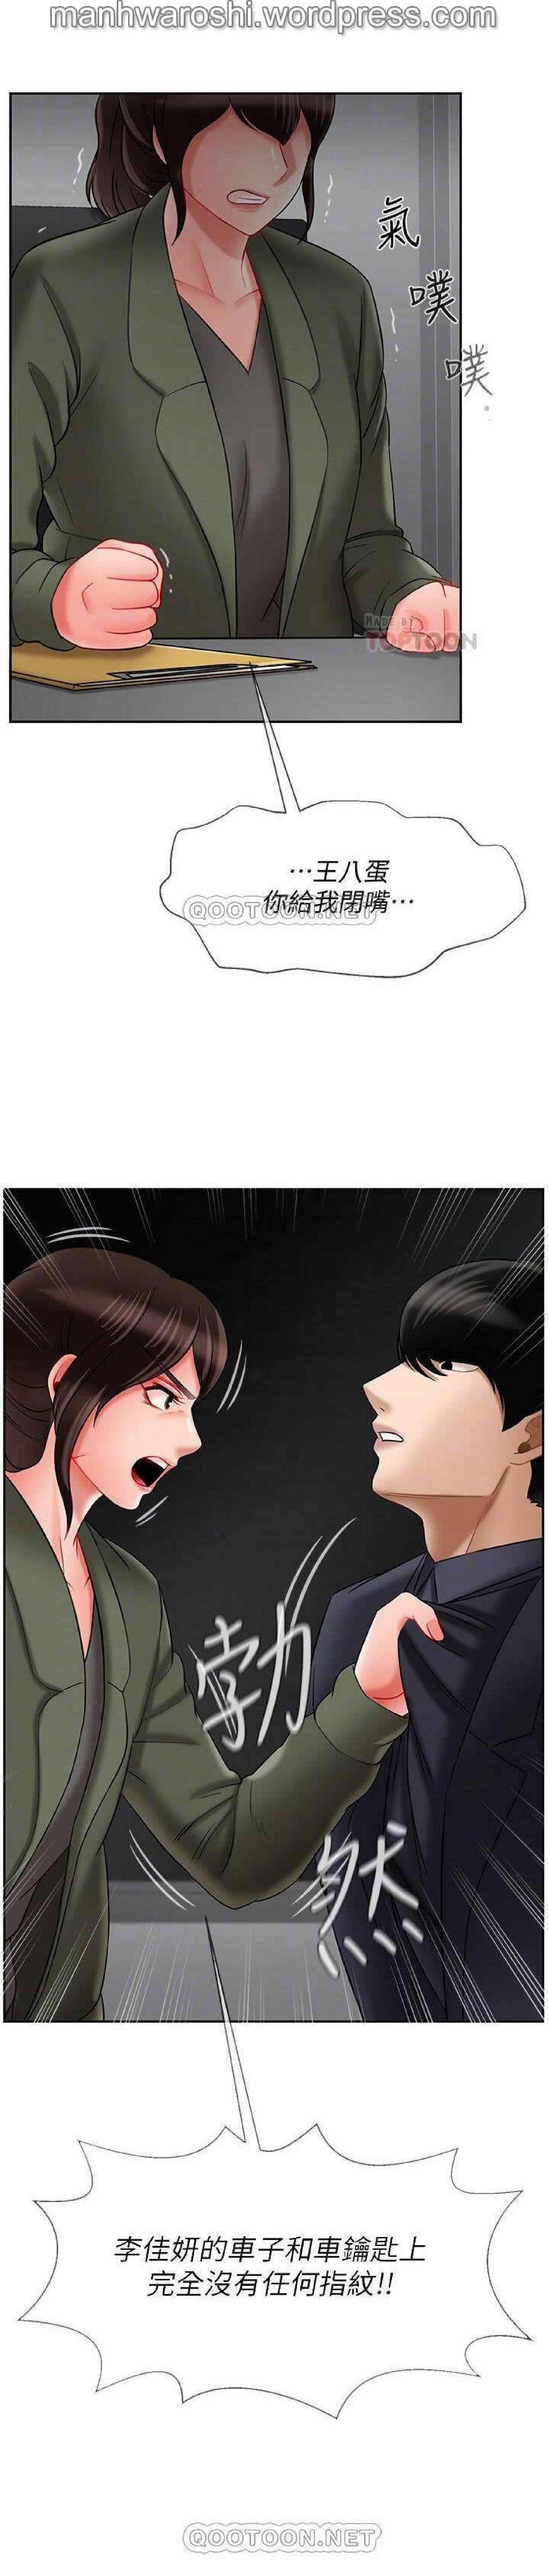 Free Amateur Porn 坏老师 | PHYSICAL CLASSROOM 21 [Chinese] Manhwa Couple Sex - Page 10